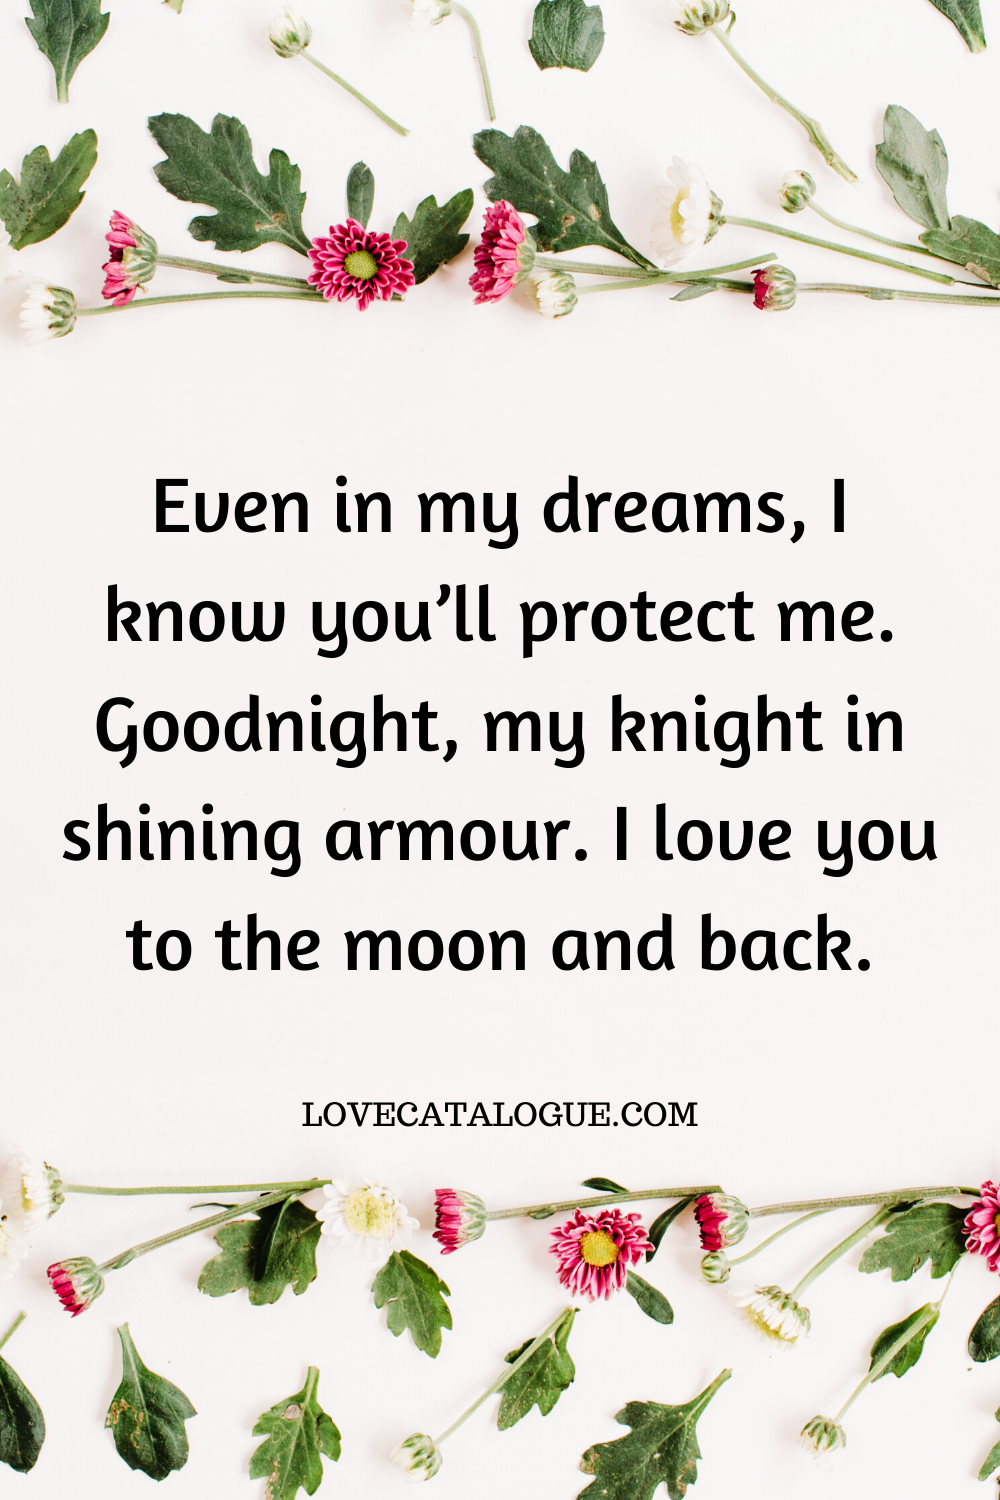 Romantic Good Night Love Messages To My Better Half Love Catalogue